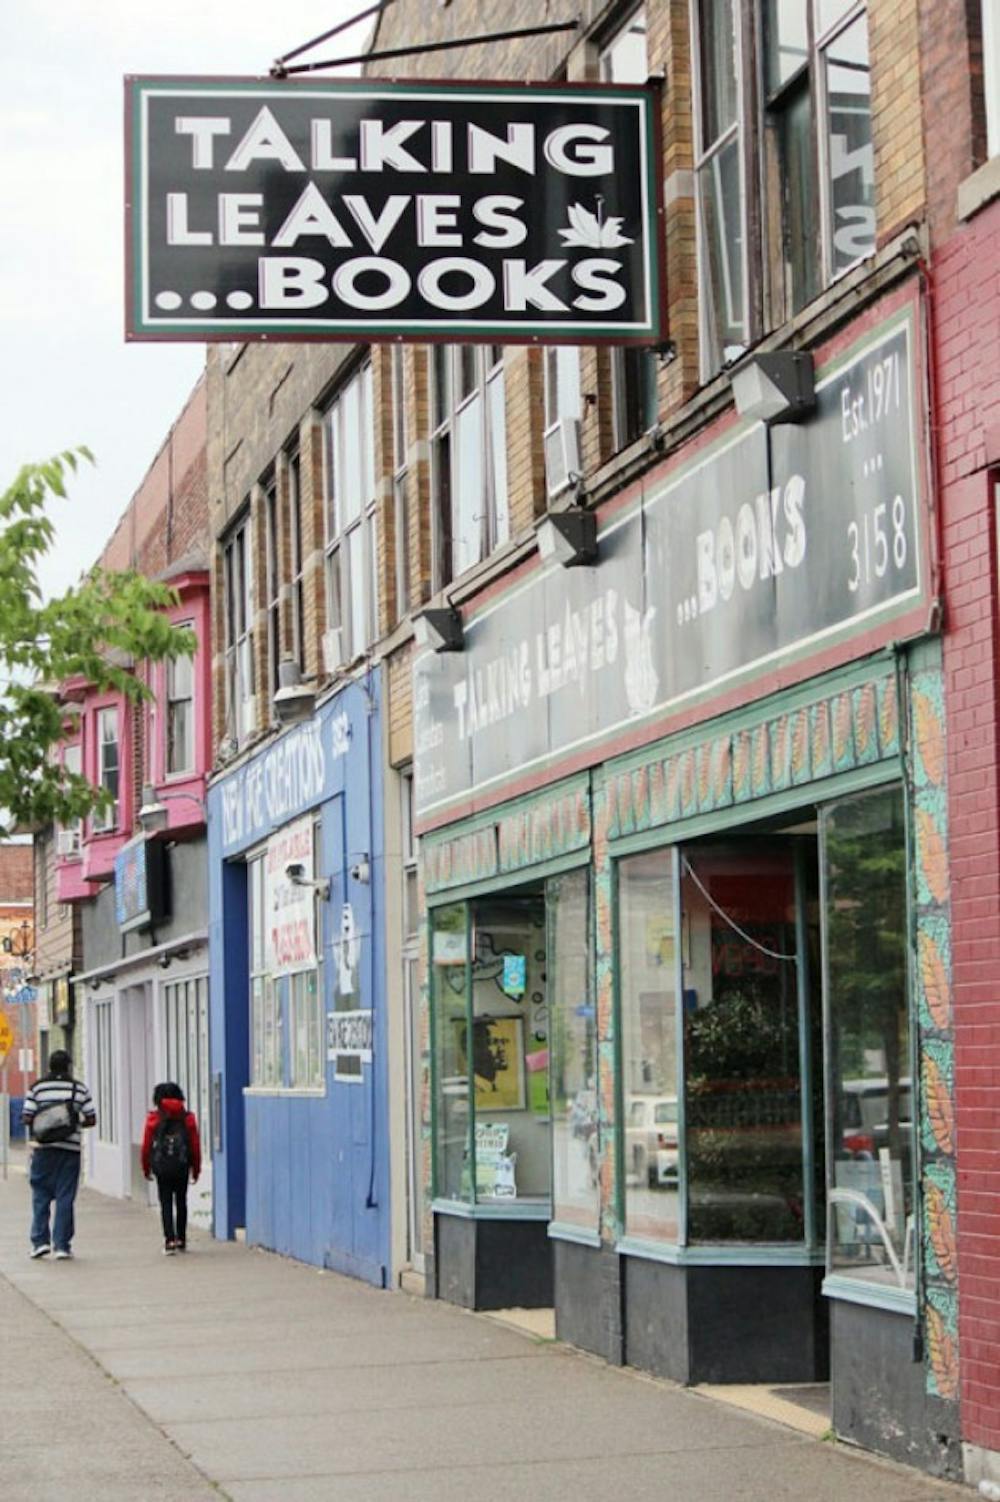 As one of the few locally owned bookstores in Buffalo, Talking Leaves offers a wide array of books from best-sellers to international works. Located a few blocks away from South Campus, Talking Leaves is convenient for students.&nbsp;Jenna Bower, The Spectrum